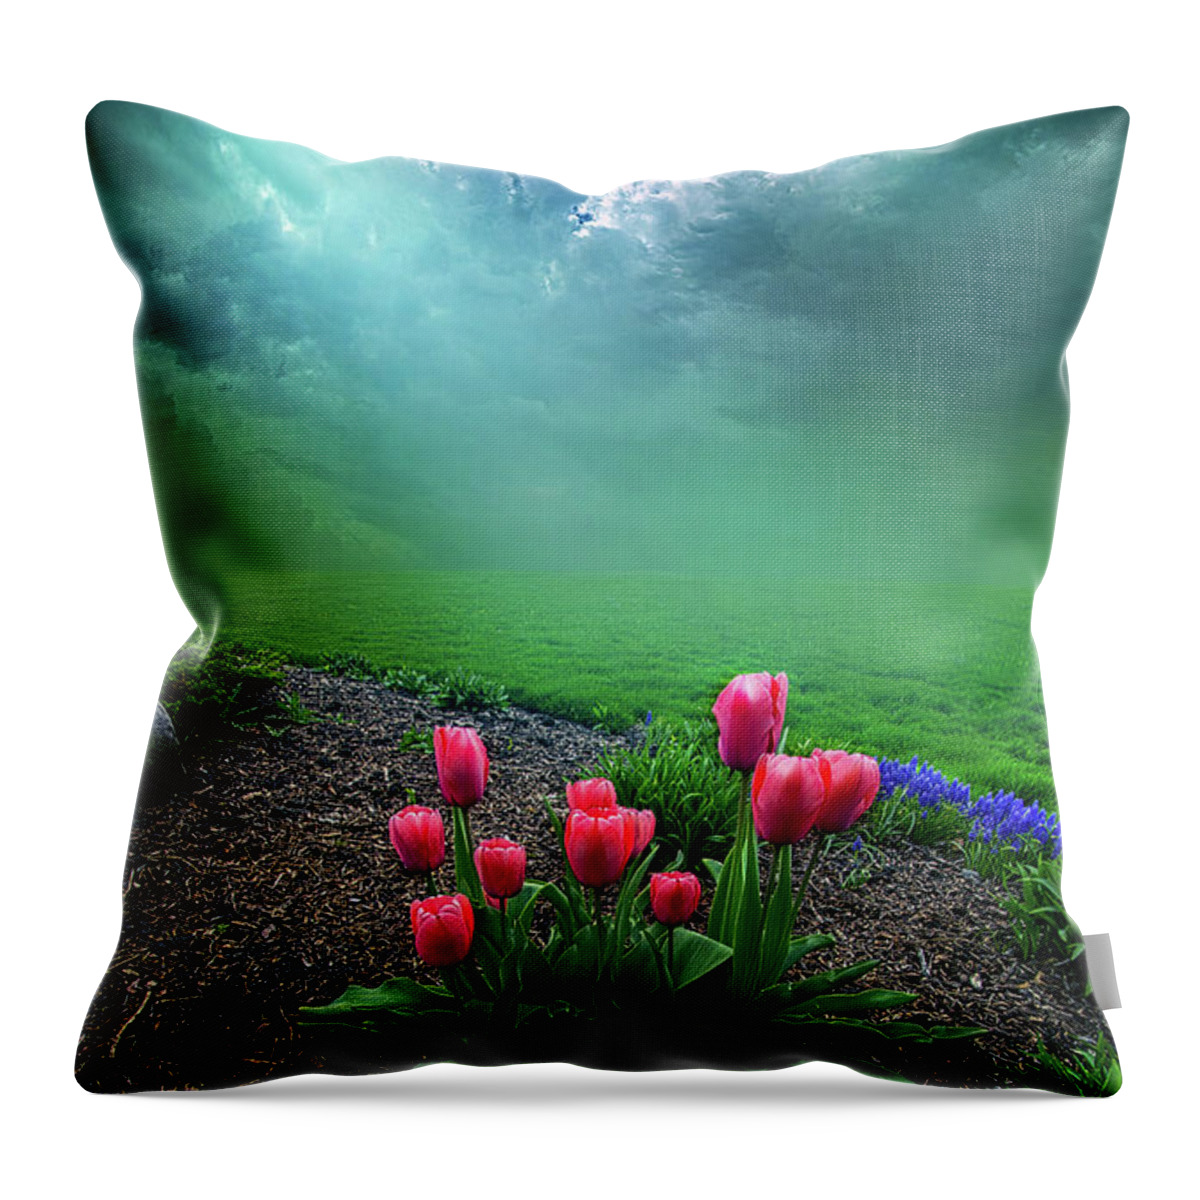 Clouds Throw Pillow featuring the photograph A Dream For You by Phil Koch